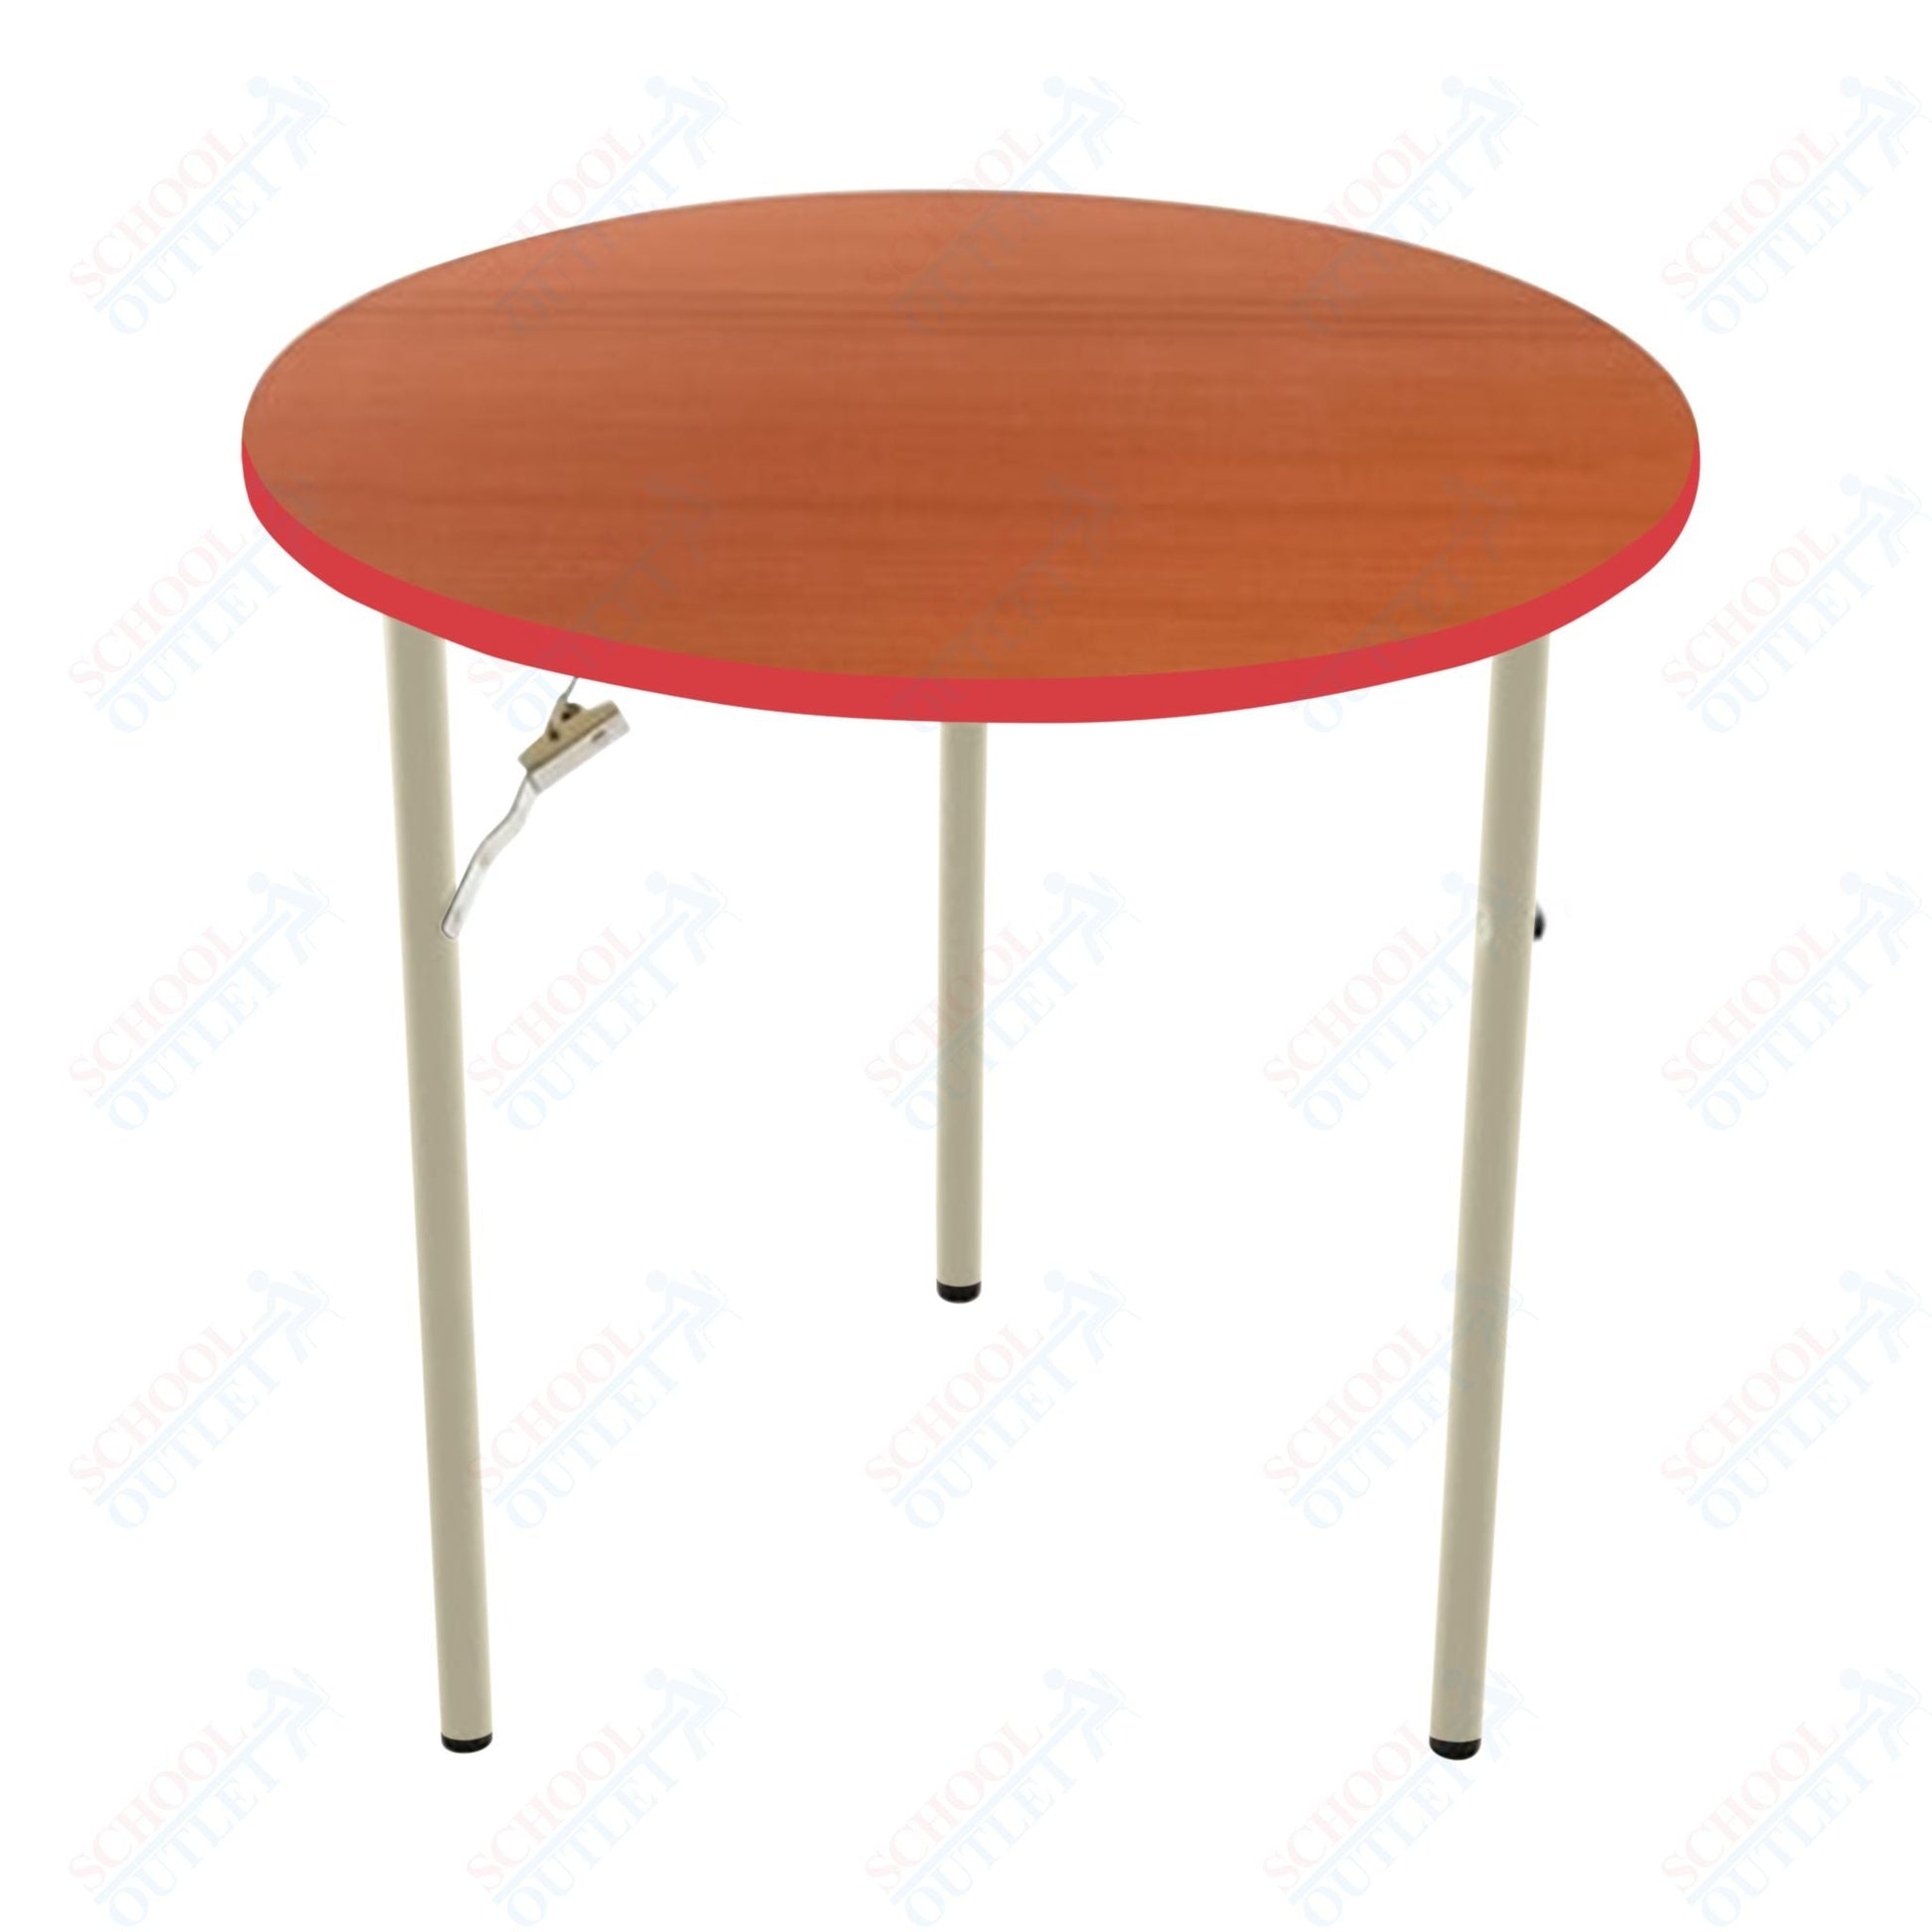 AmTab Folding Table - Plywood Stained and Sealed - Vinyl T - Molding Edge - Round - 48" Diameter x 29"H (AmTab AMT - R48PM) - SchoolOutlet